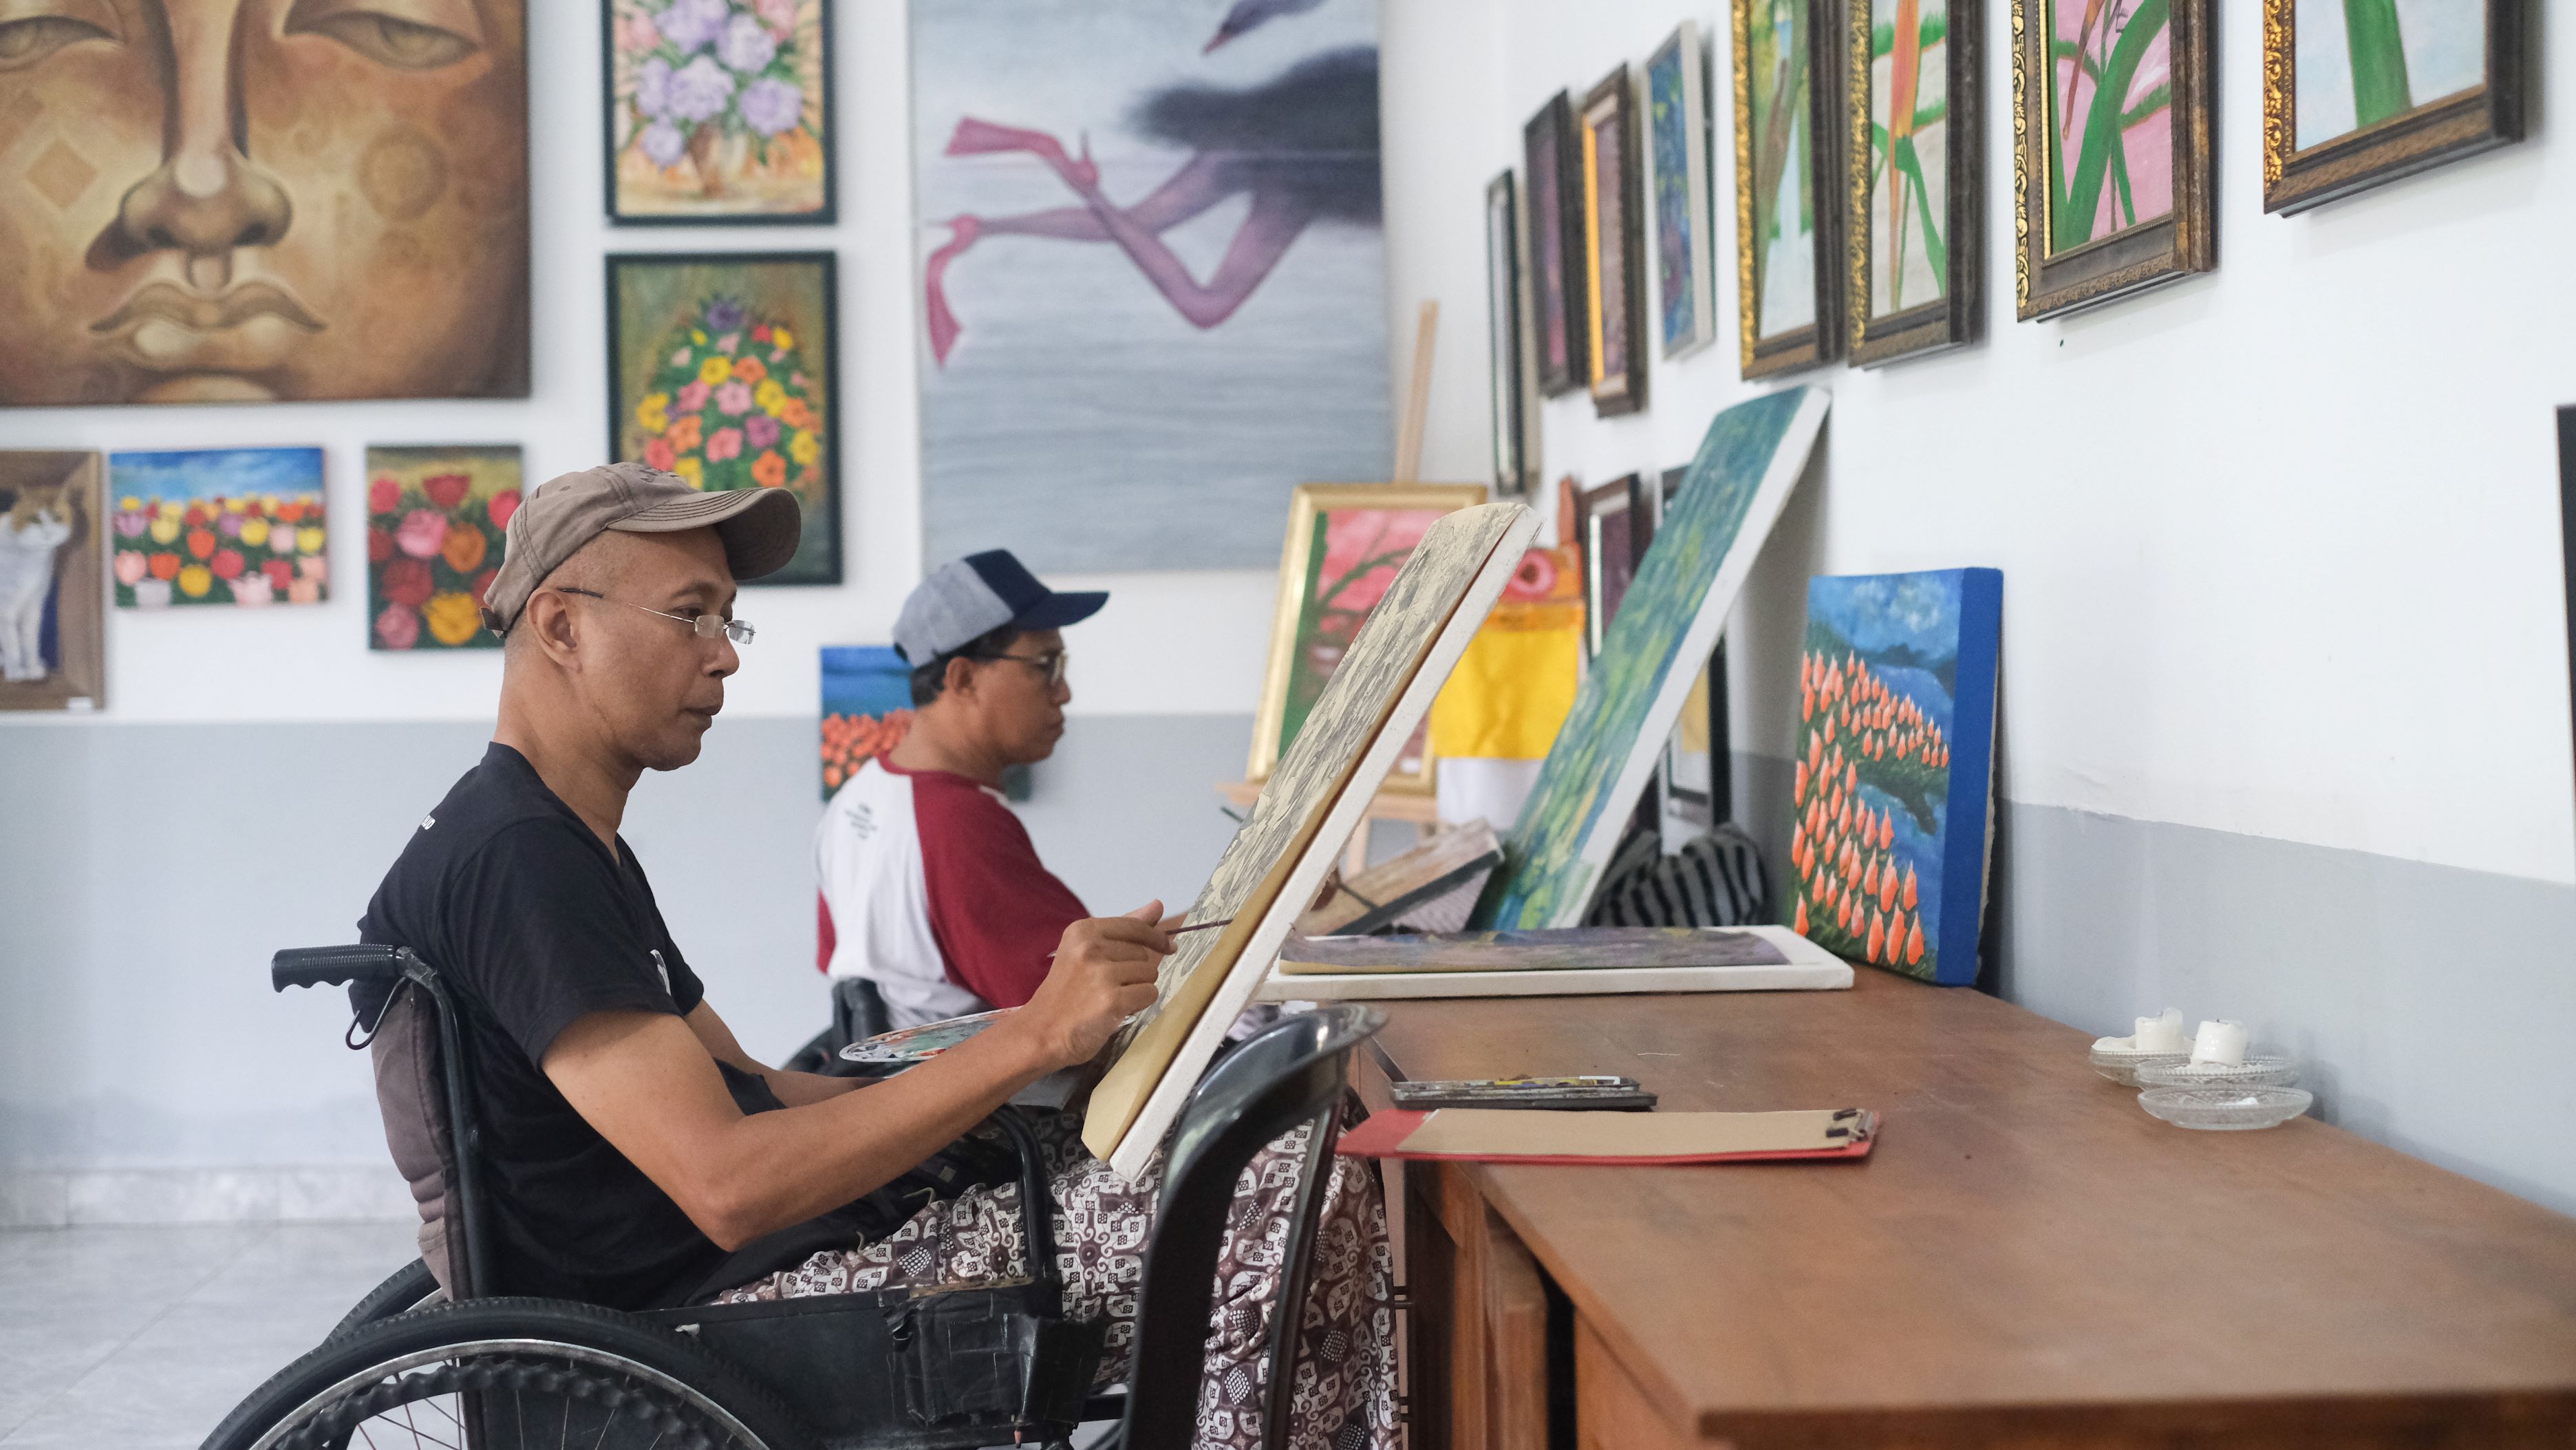 KAPPA SENSES UBUD PROUDLY PRESENTS: AN EXTRAORDINARY ARTISTIC JOURNEY OF RESILIENCE AND INCLUSION